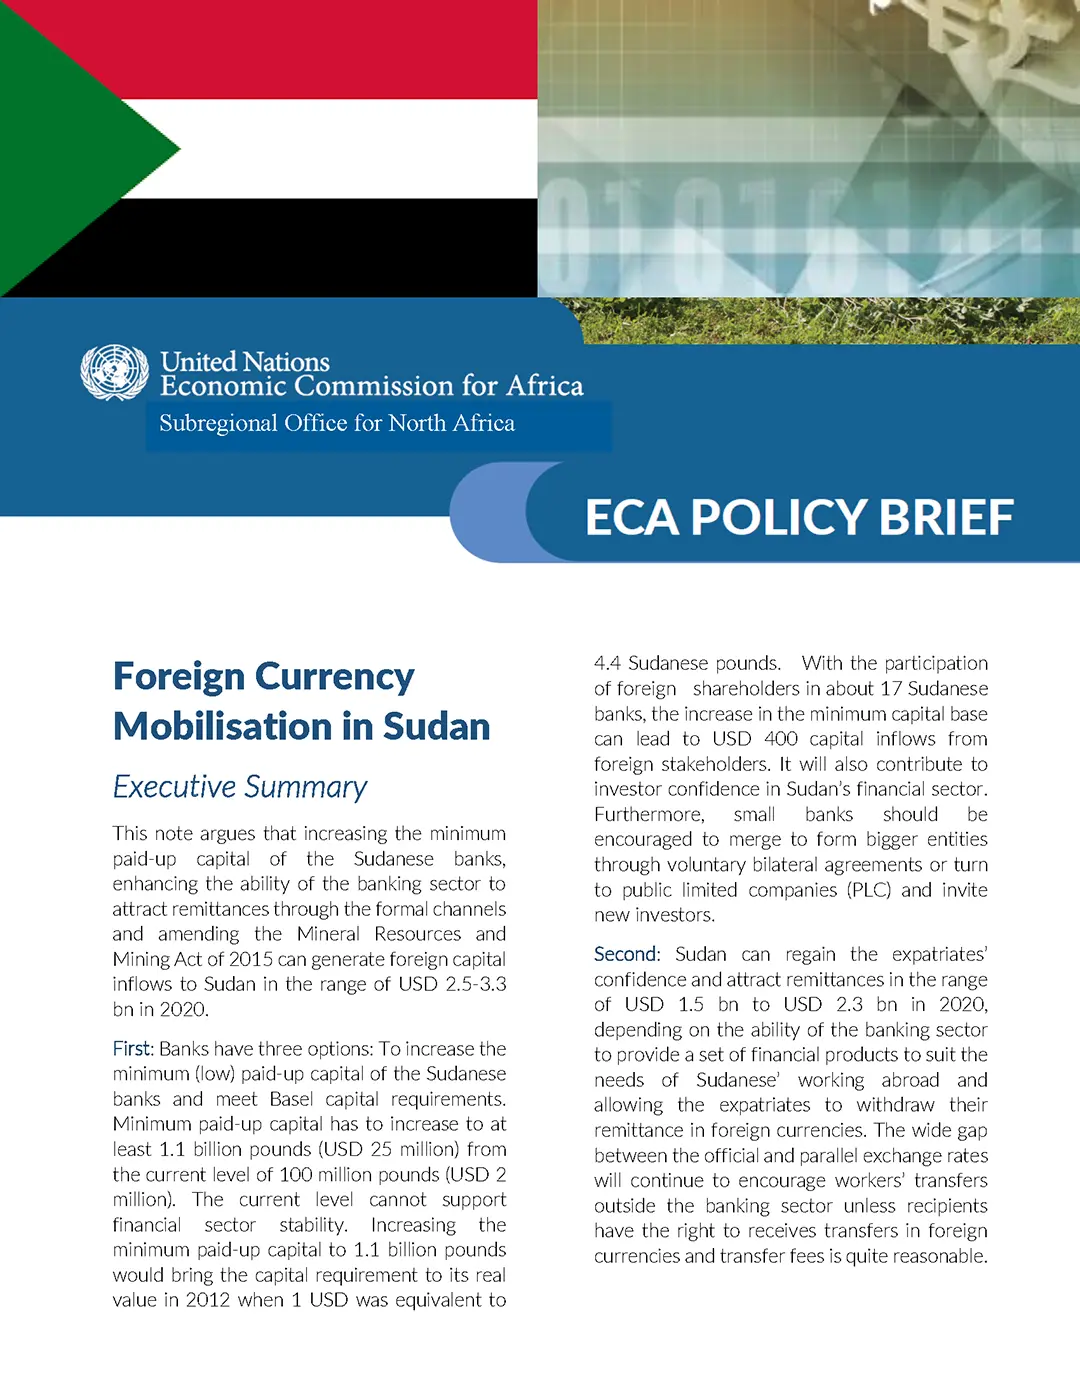 Foreign Currency Mobilisation in Sudan